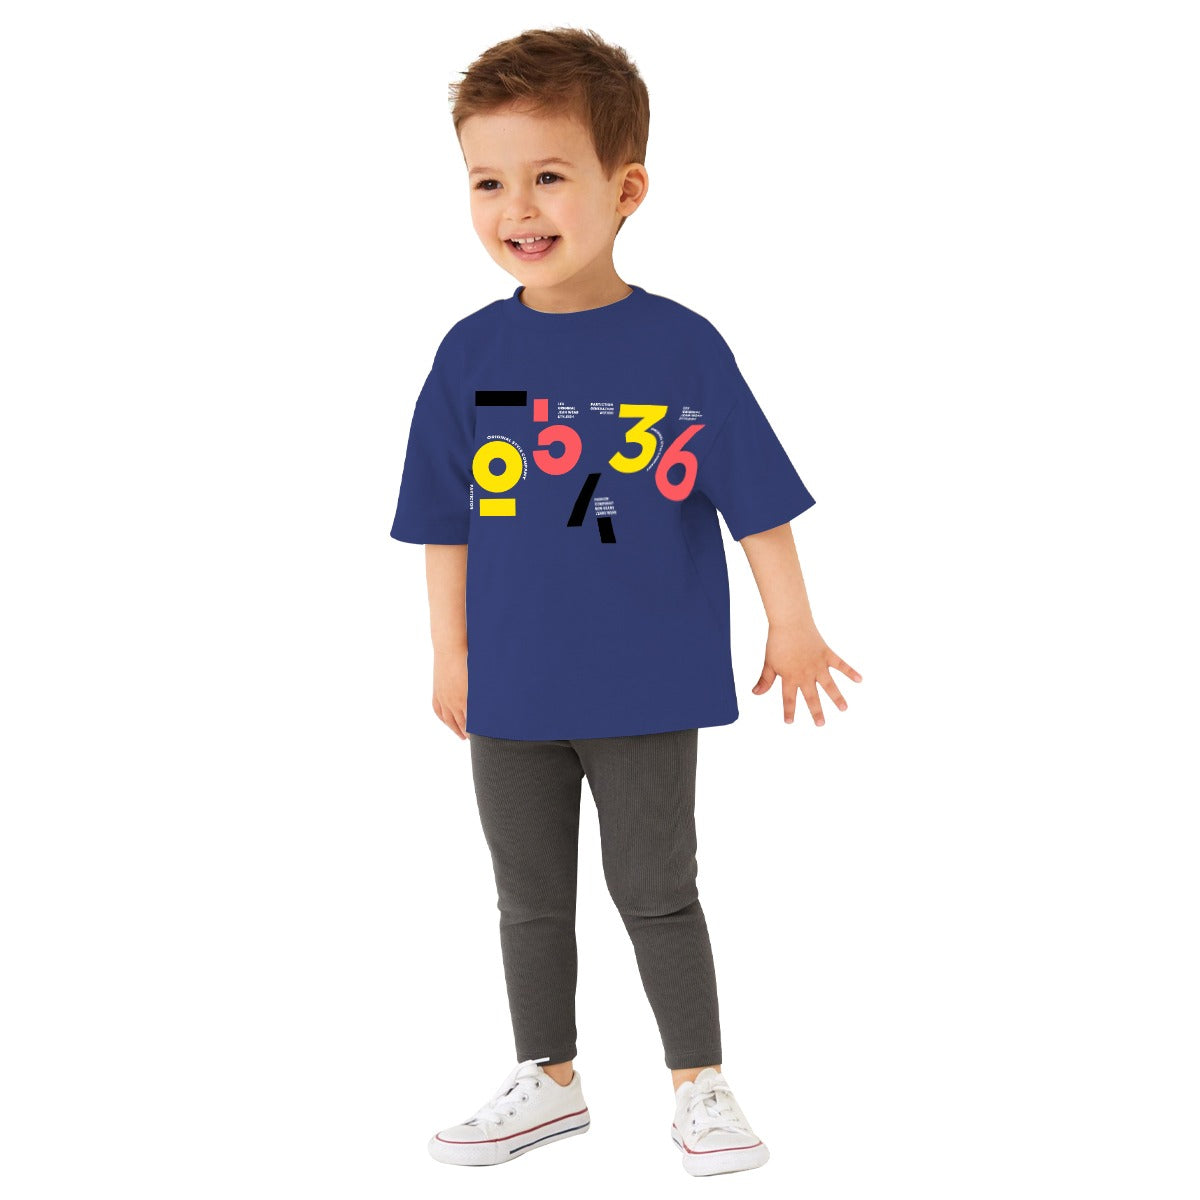 EXCLUSIVE GRAPHIC PRINTED BOY'S TEE SHIRT - NAVY